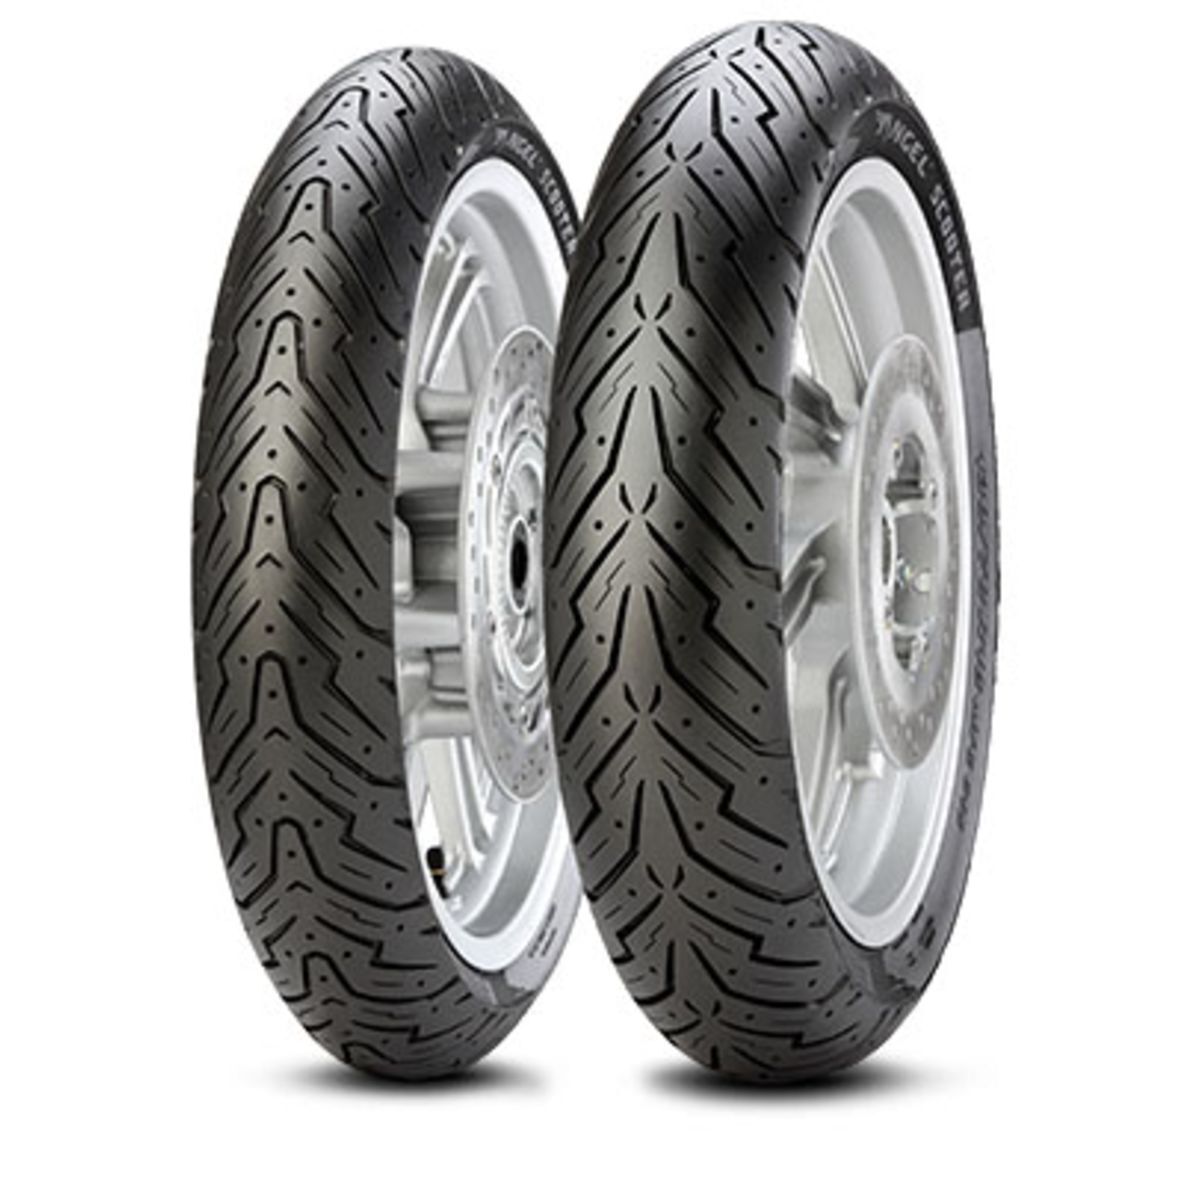 Pirelli Pneumatico scooter ANGEL SCOOTER 130/70-13 TL 63P